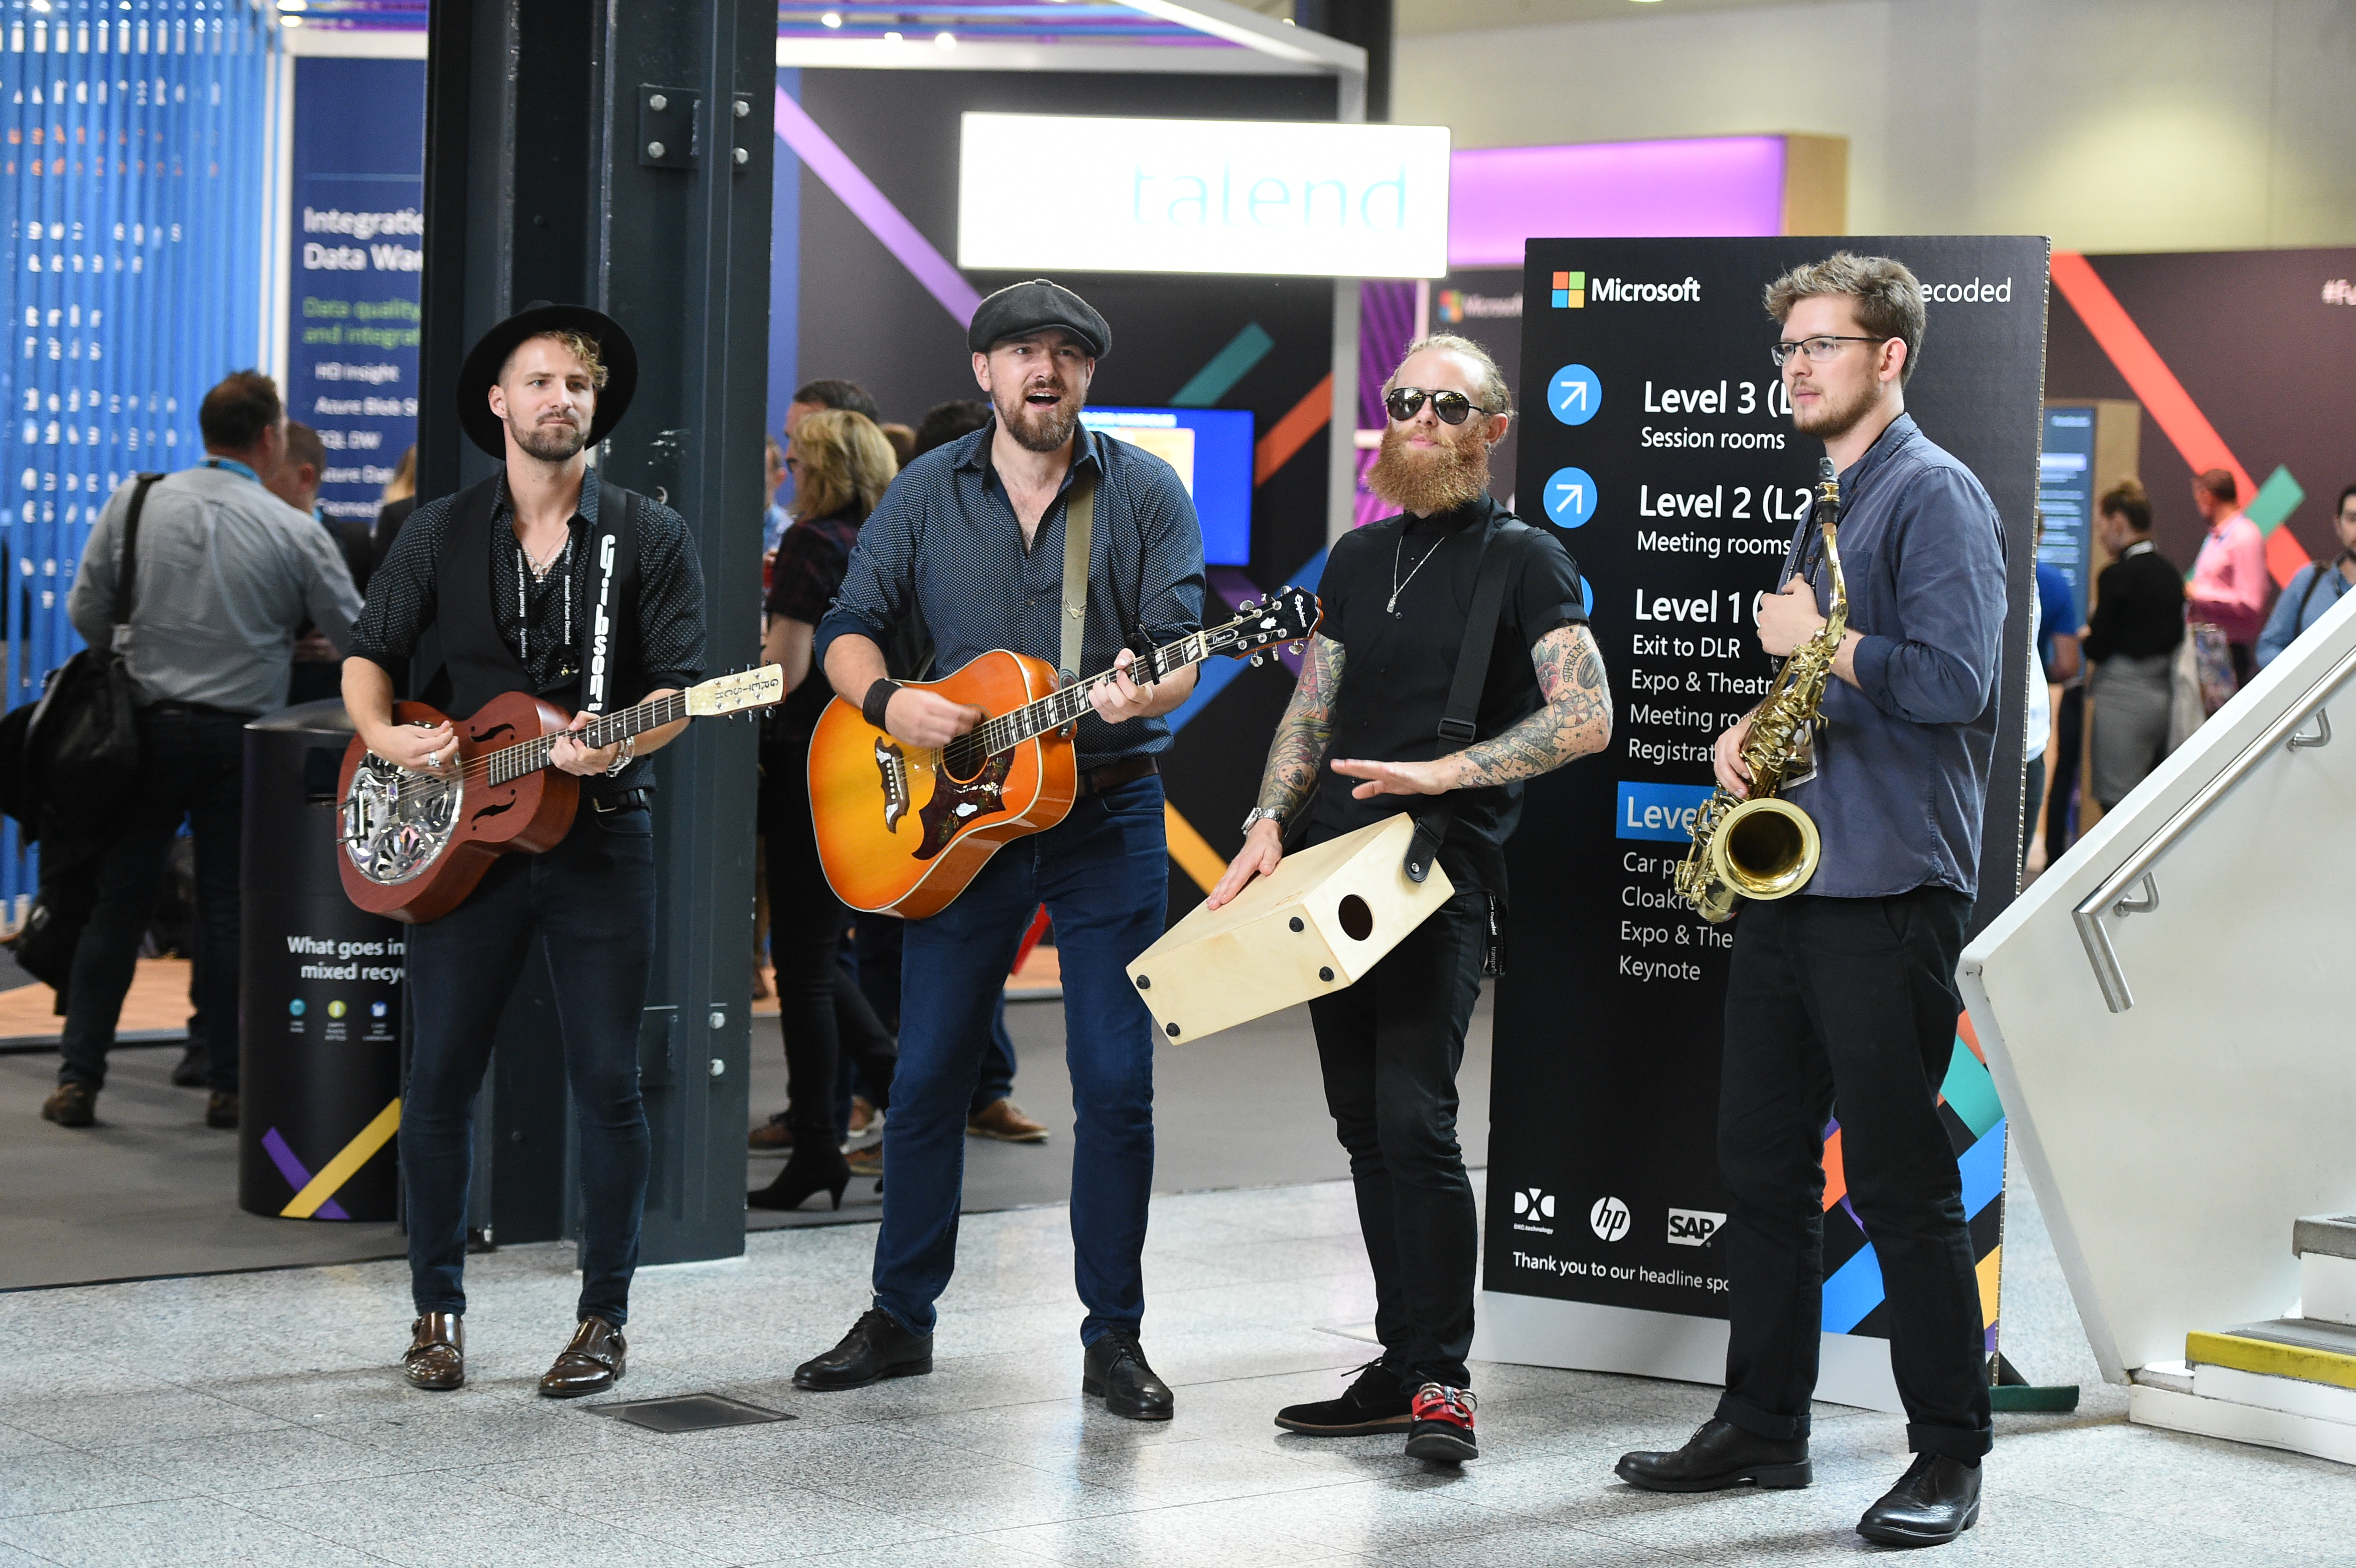 A band plays popular songs at Future Decoded